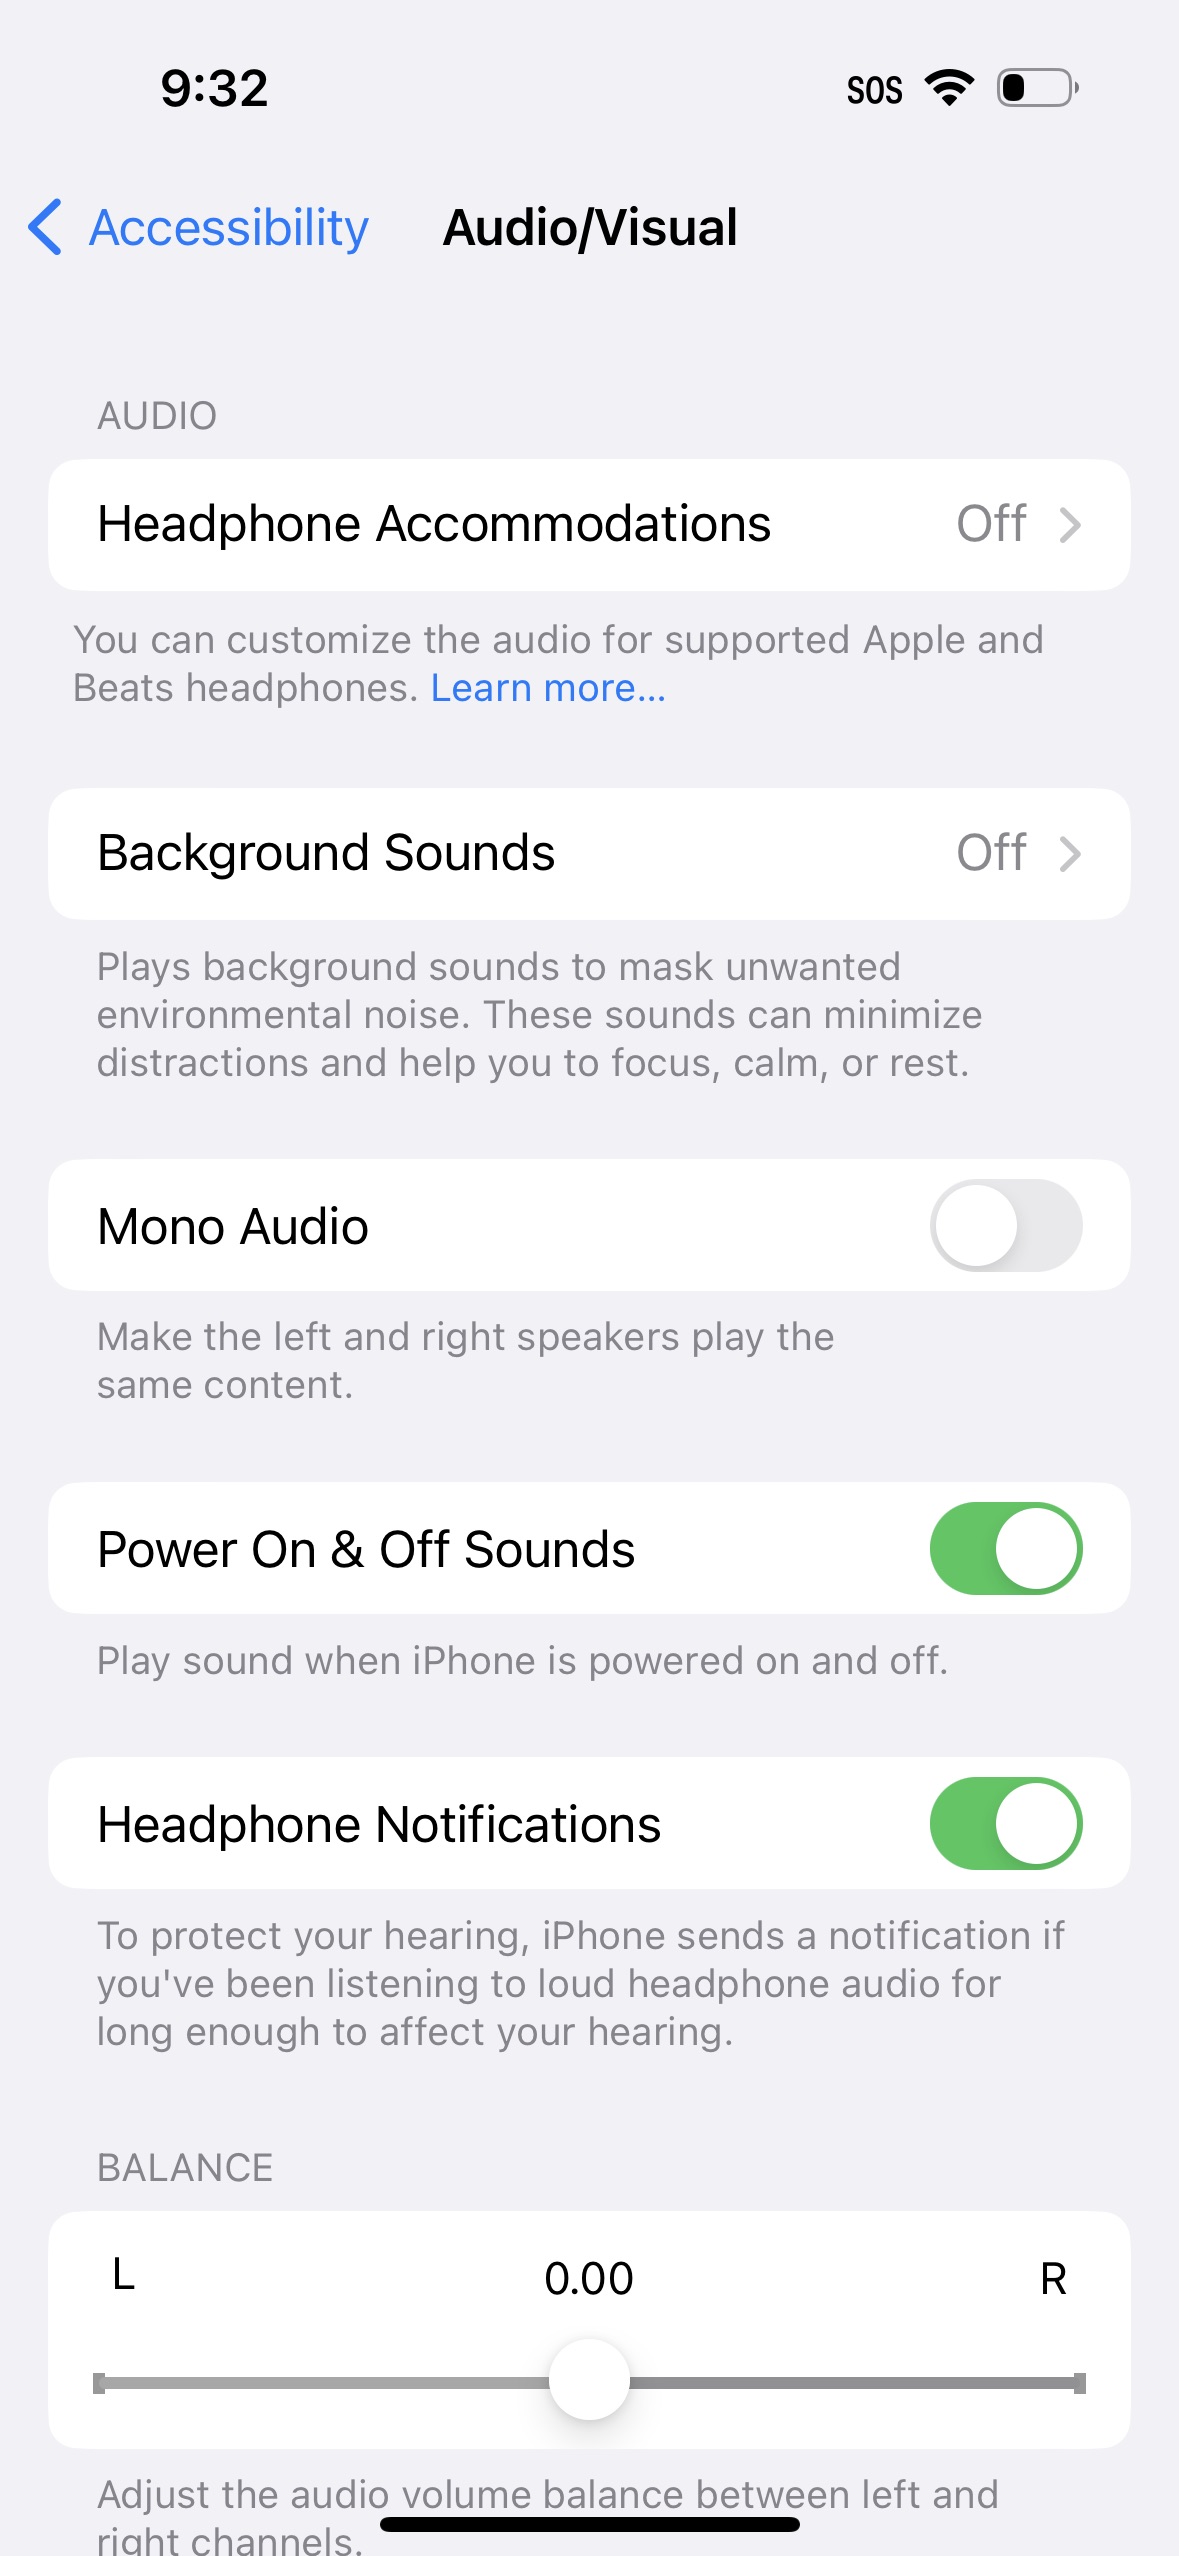 How to Turn On the iPhone Startup Sound [Video]